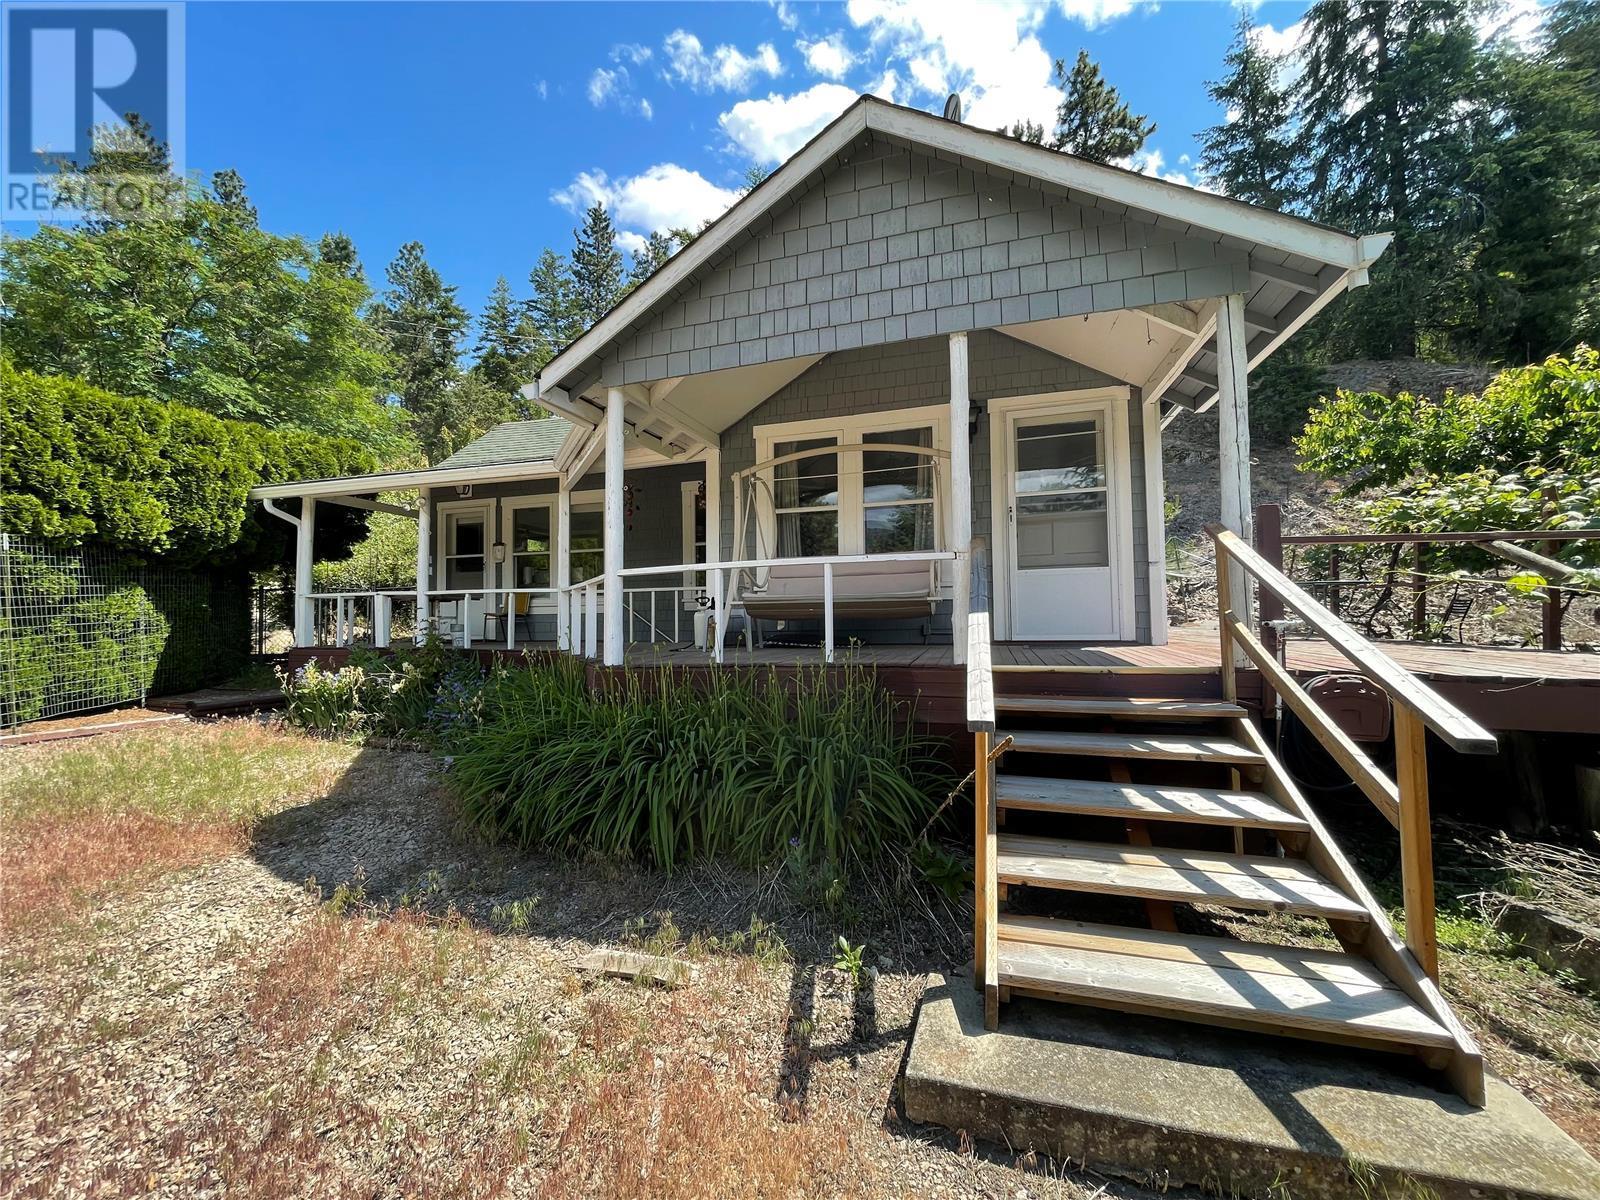  110 Russell Road, Vernon